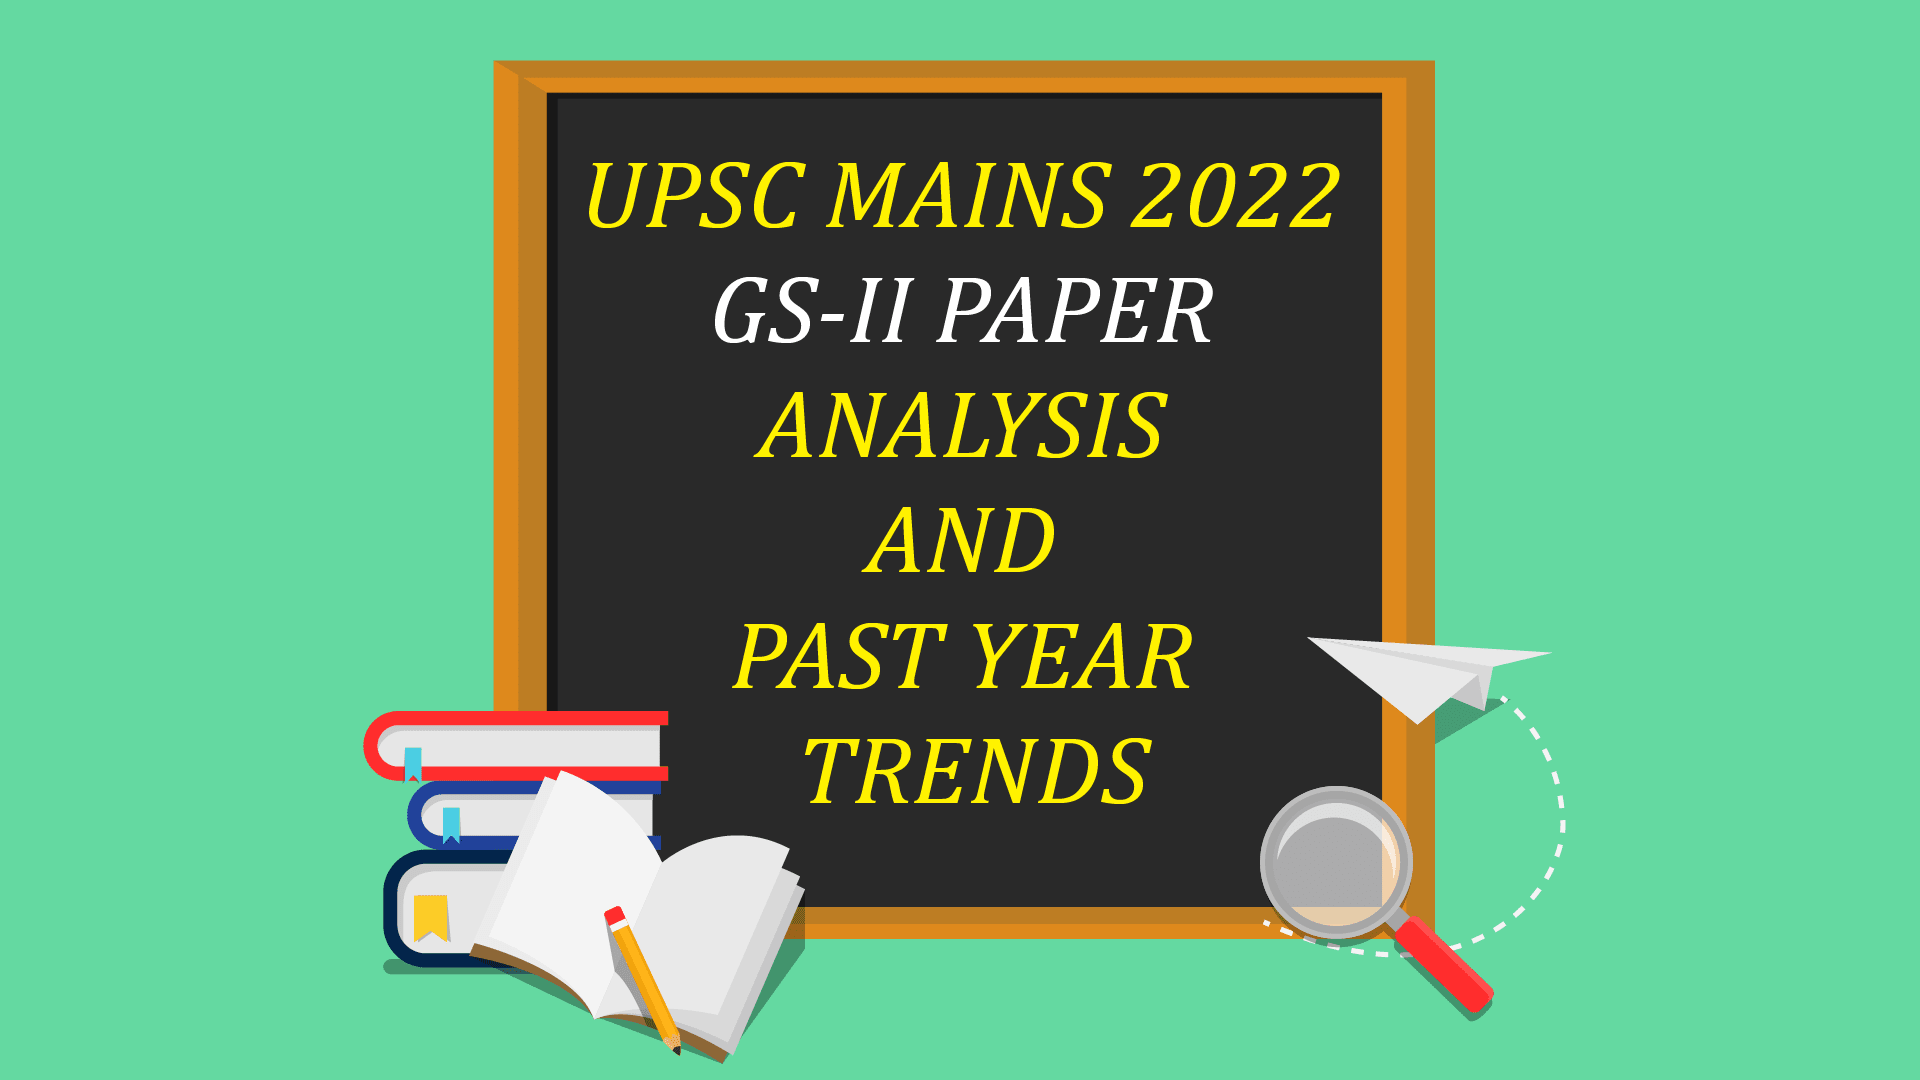 UPSC Mains 2022 GS-II Paper Analysis and Past Year Trends